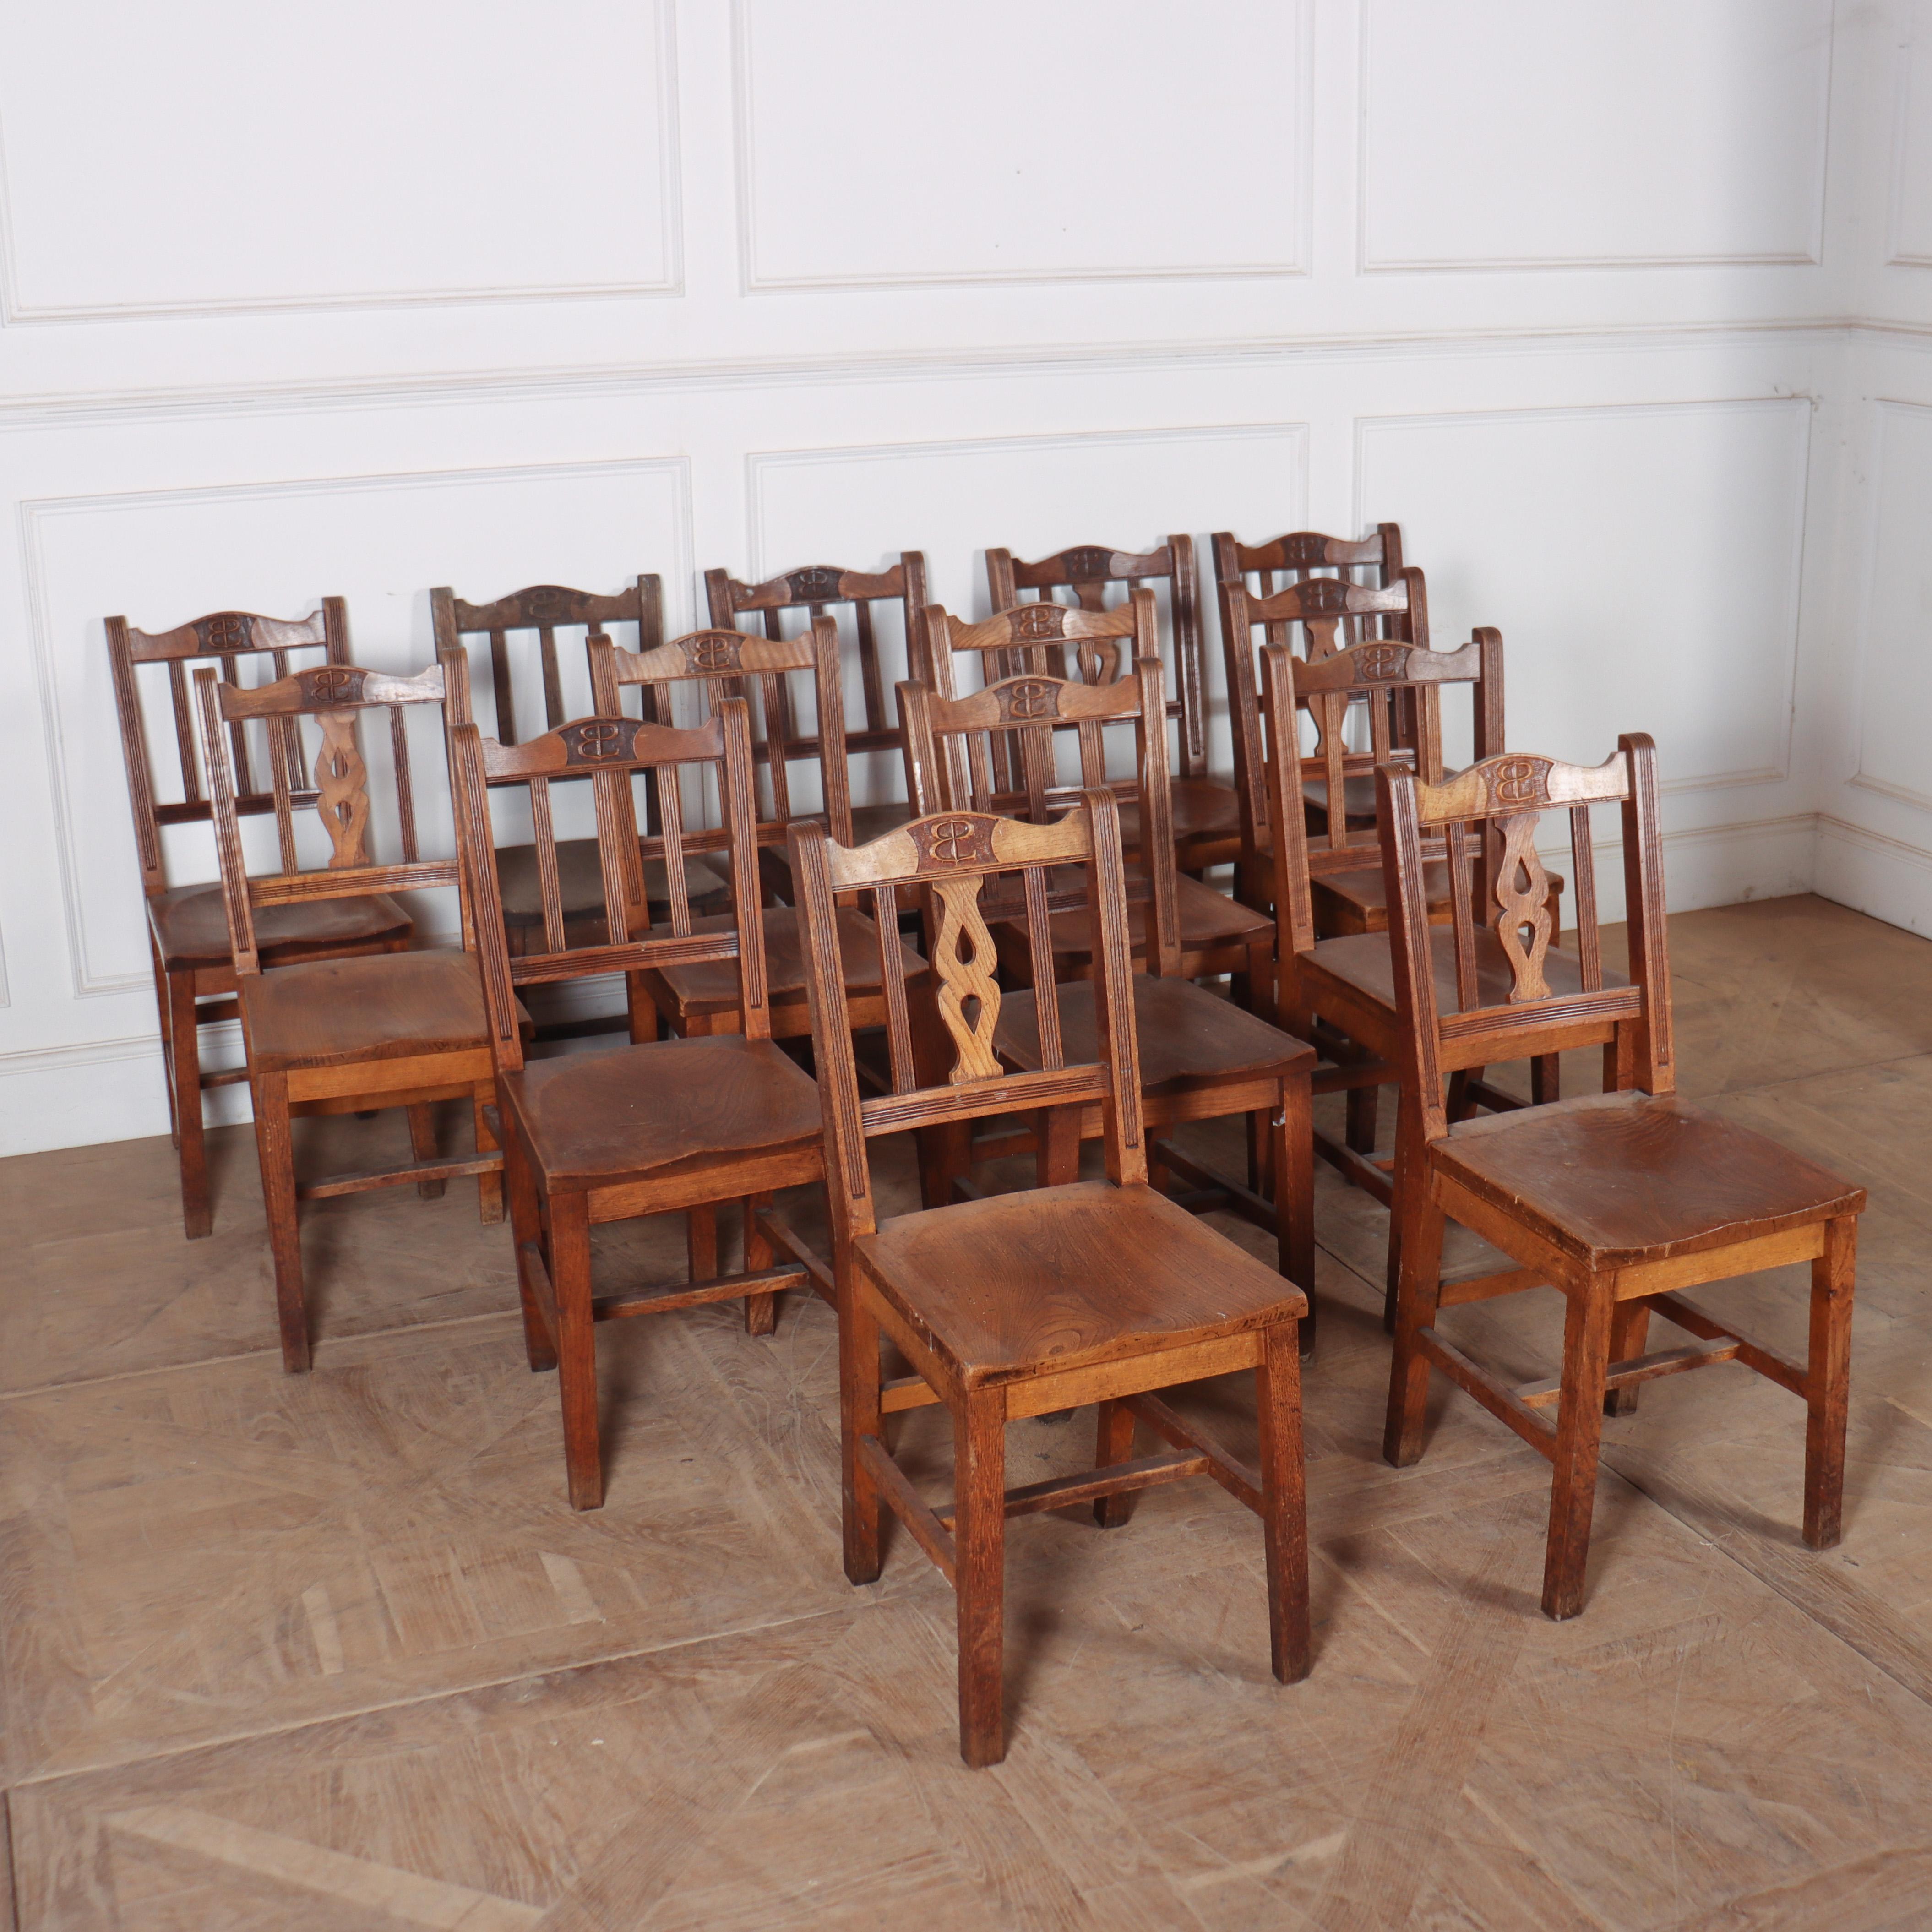 Set of 14 Scottish elm chapel chairs. Ideal for a restaurant. 1890.

Seat height is 17.5